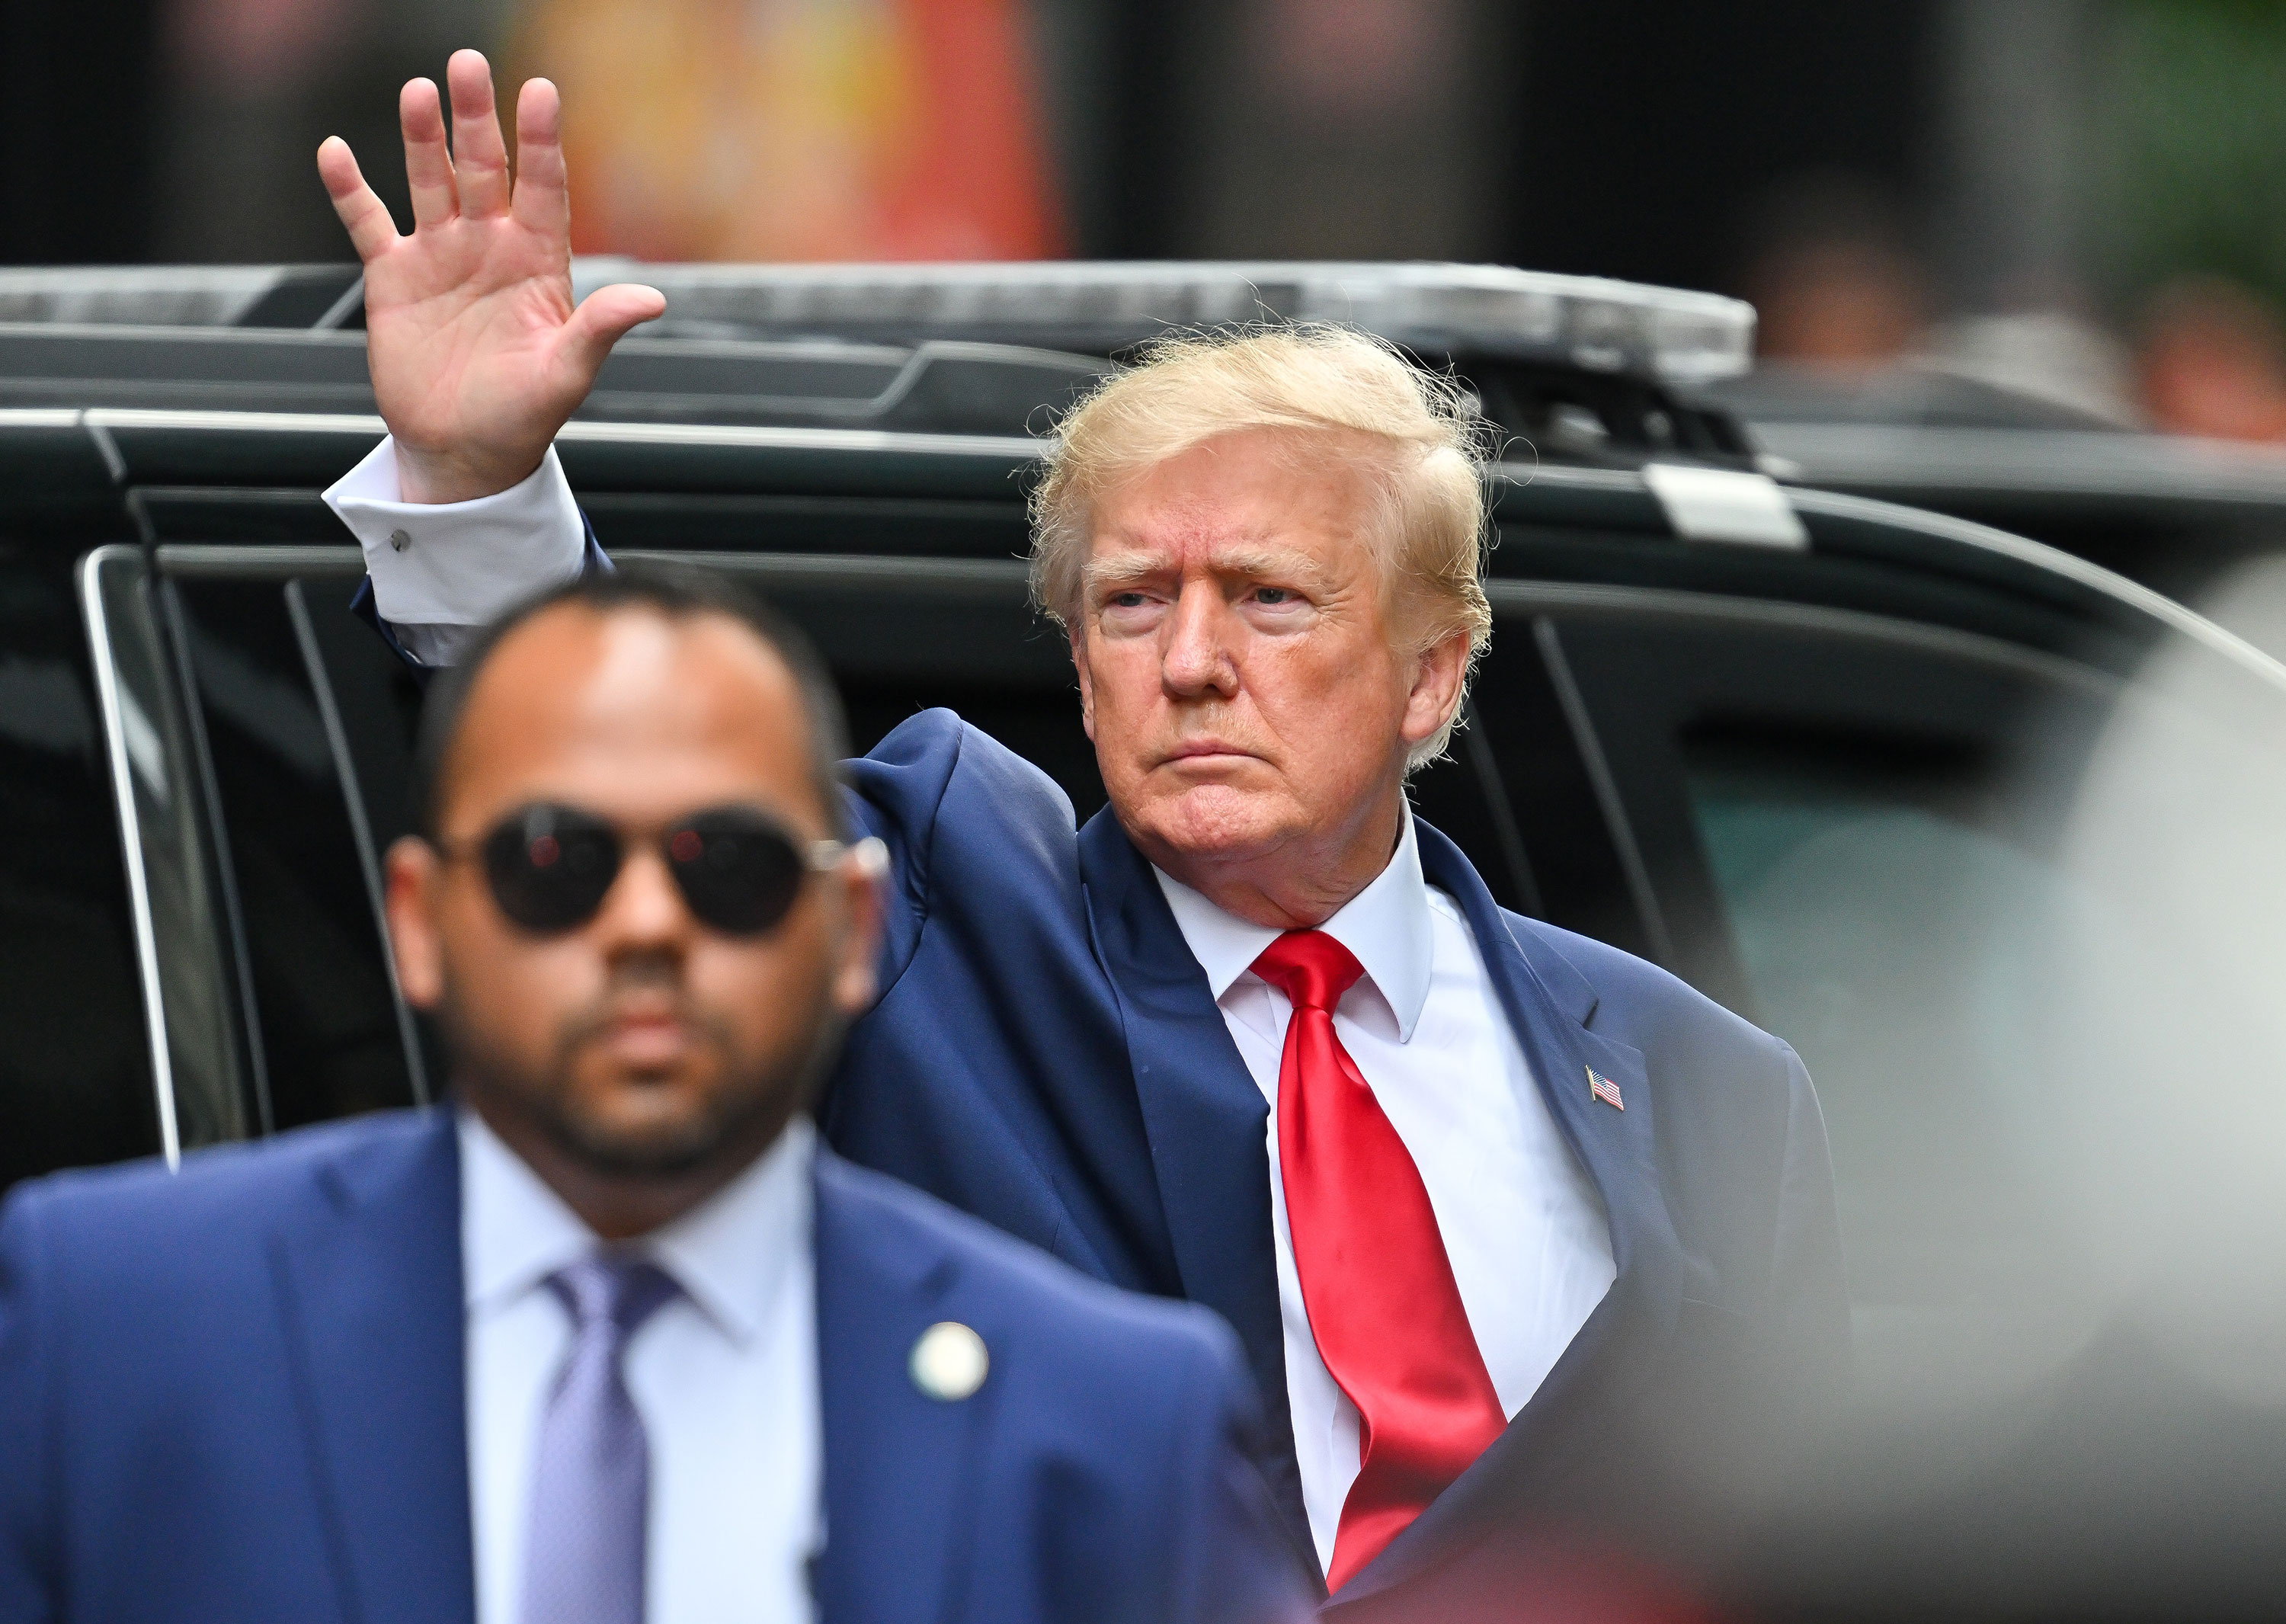 Former President Donald Trump is seen leaving Trump Tower in New York in August 2022.